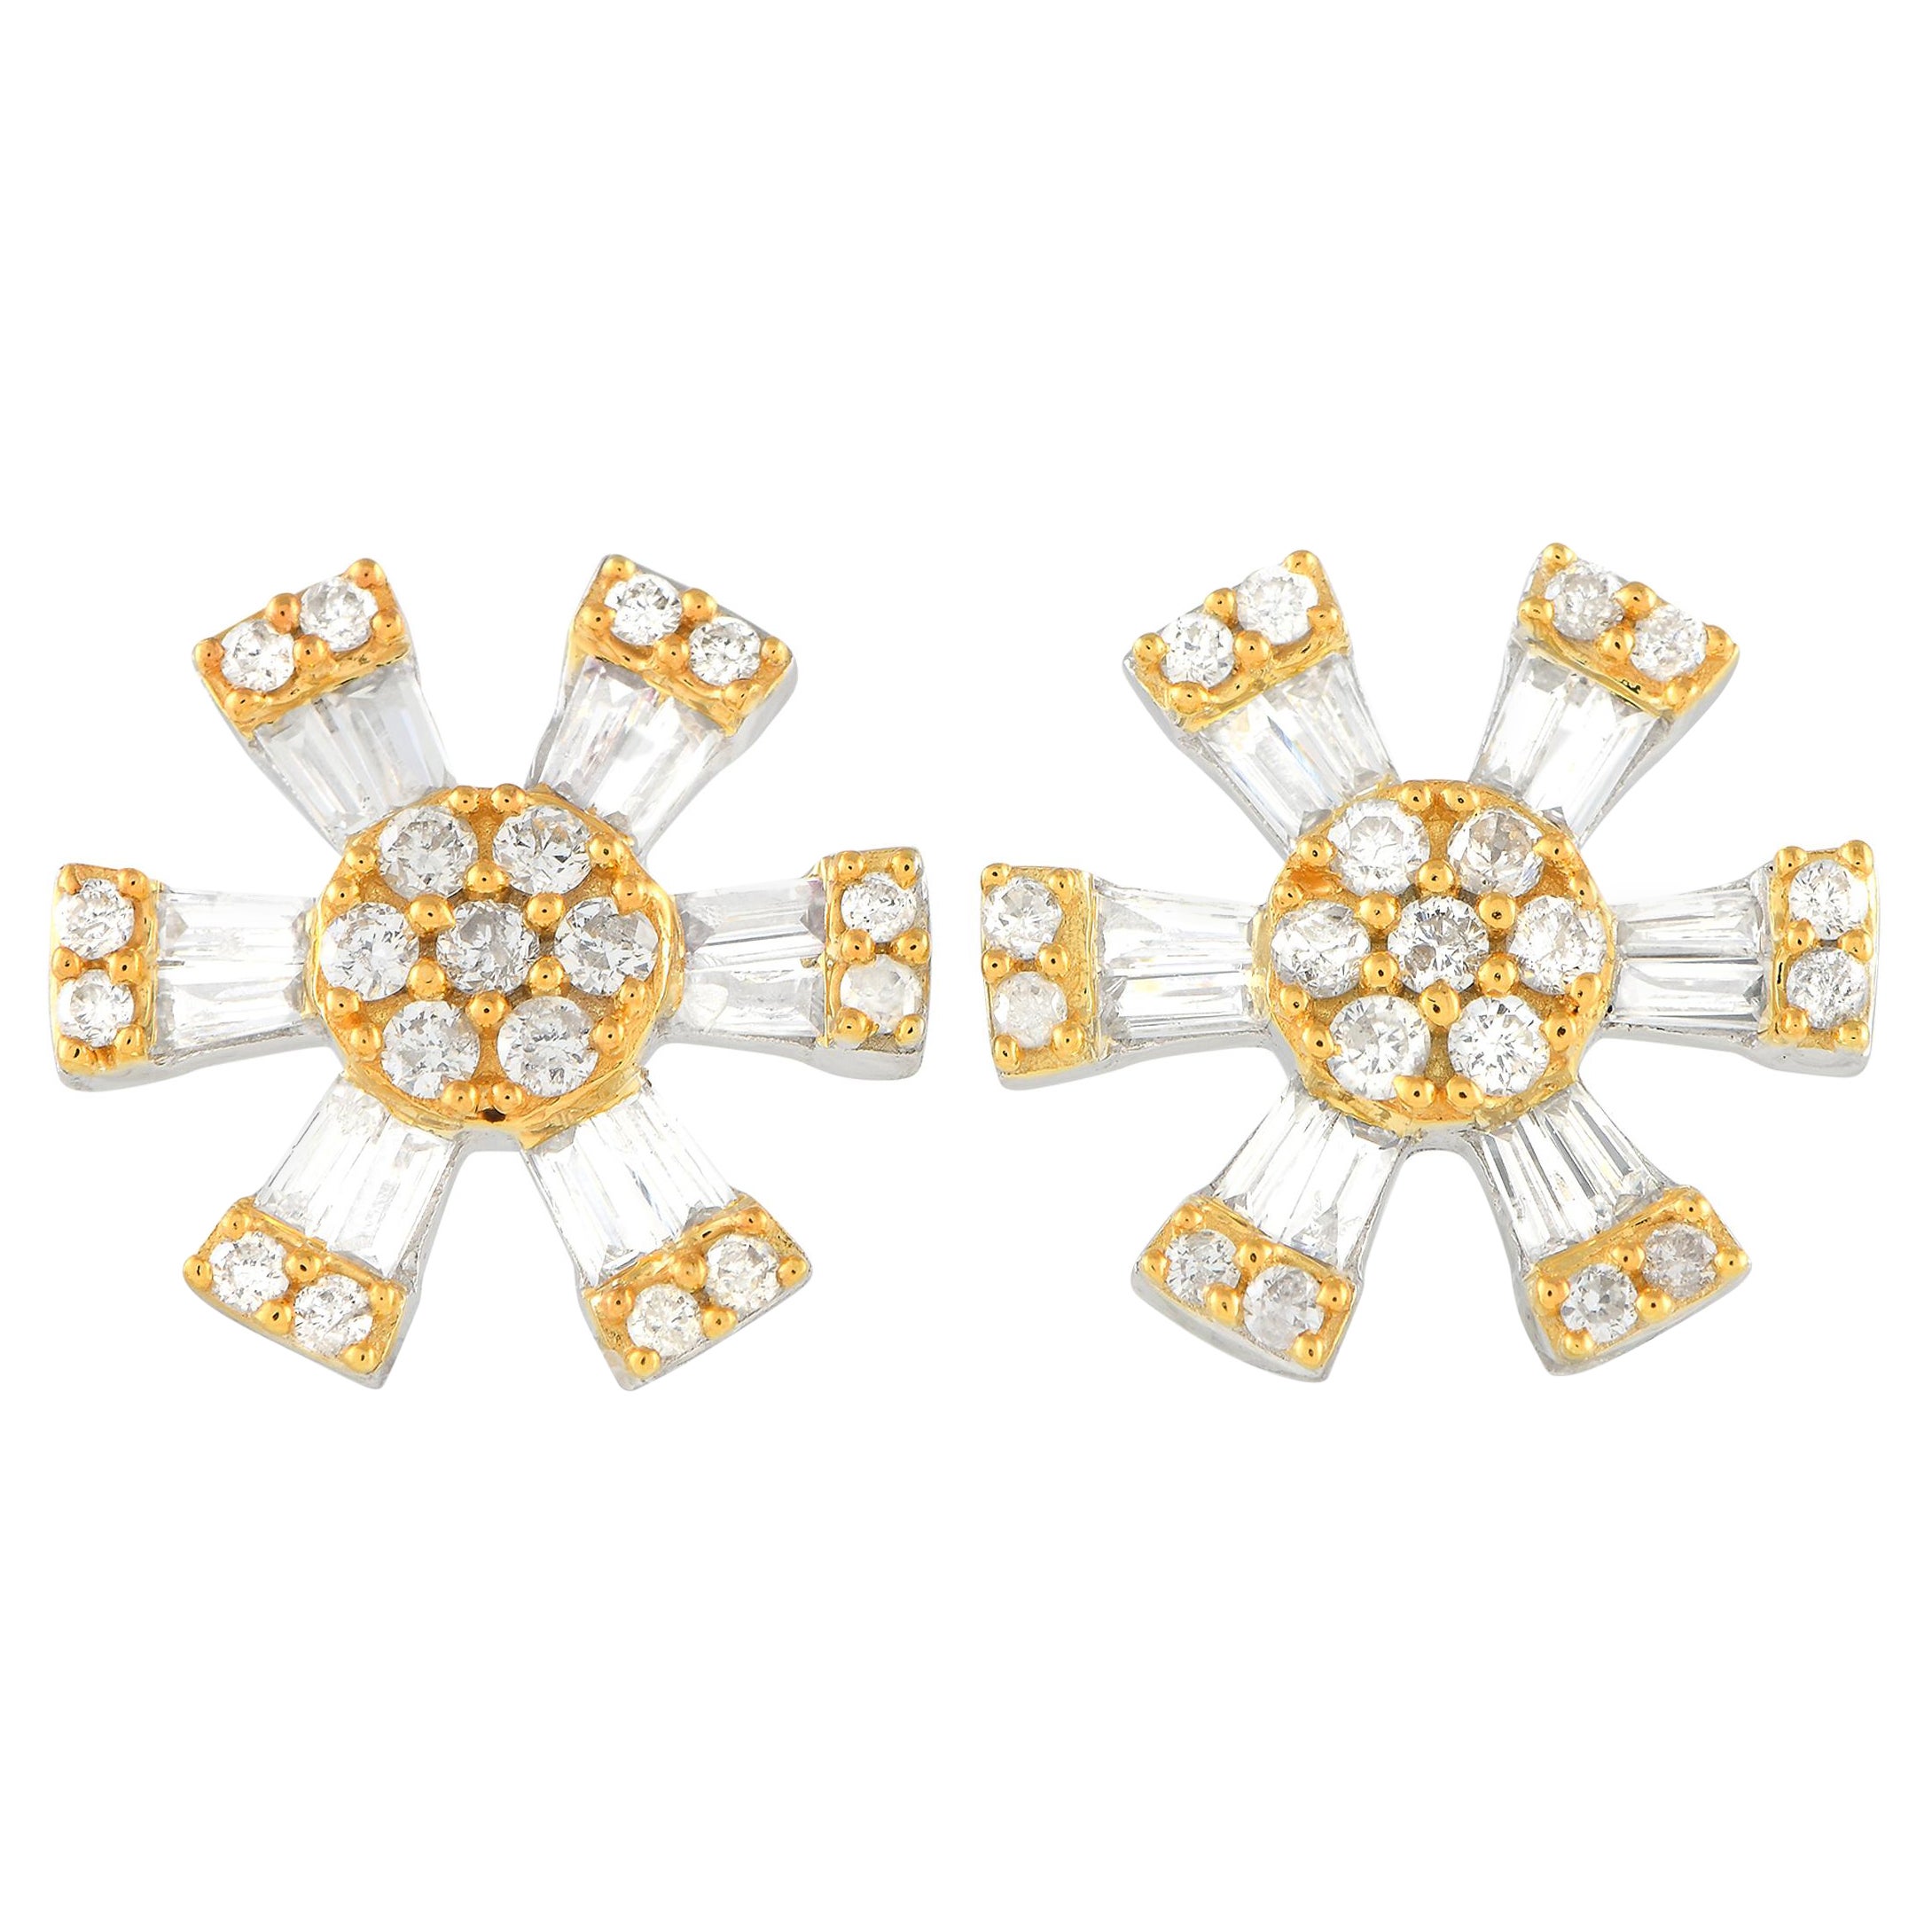 LB Exclusive 14K White and Yellow Gold 0.43ct Diamond Earrings